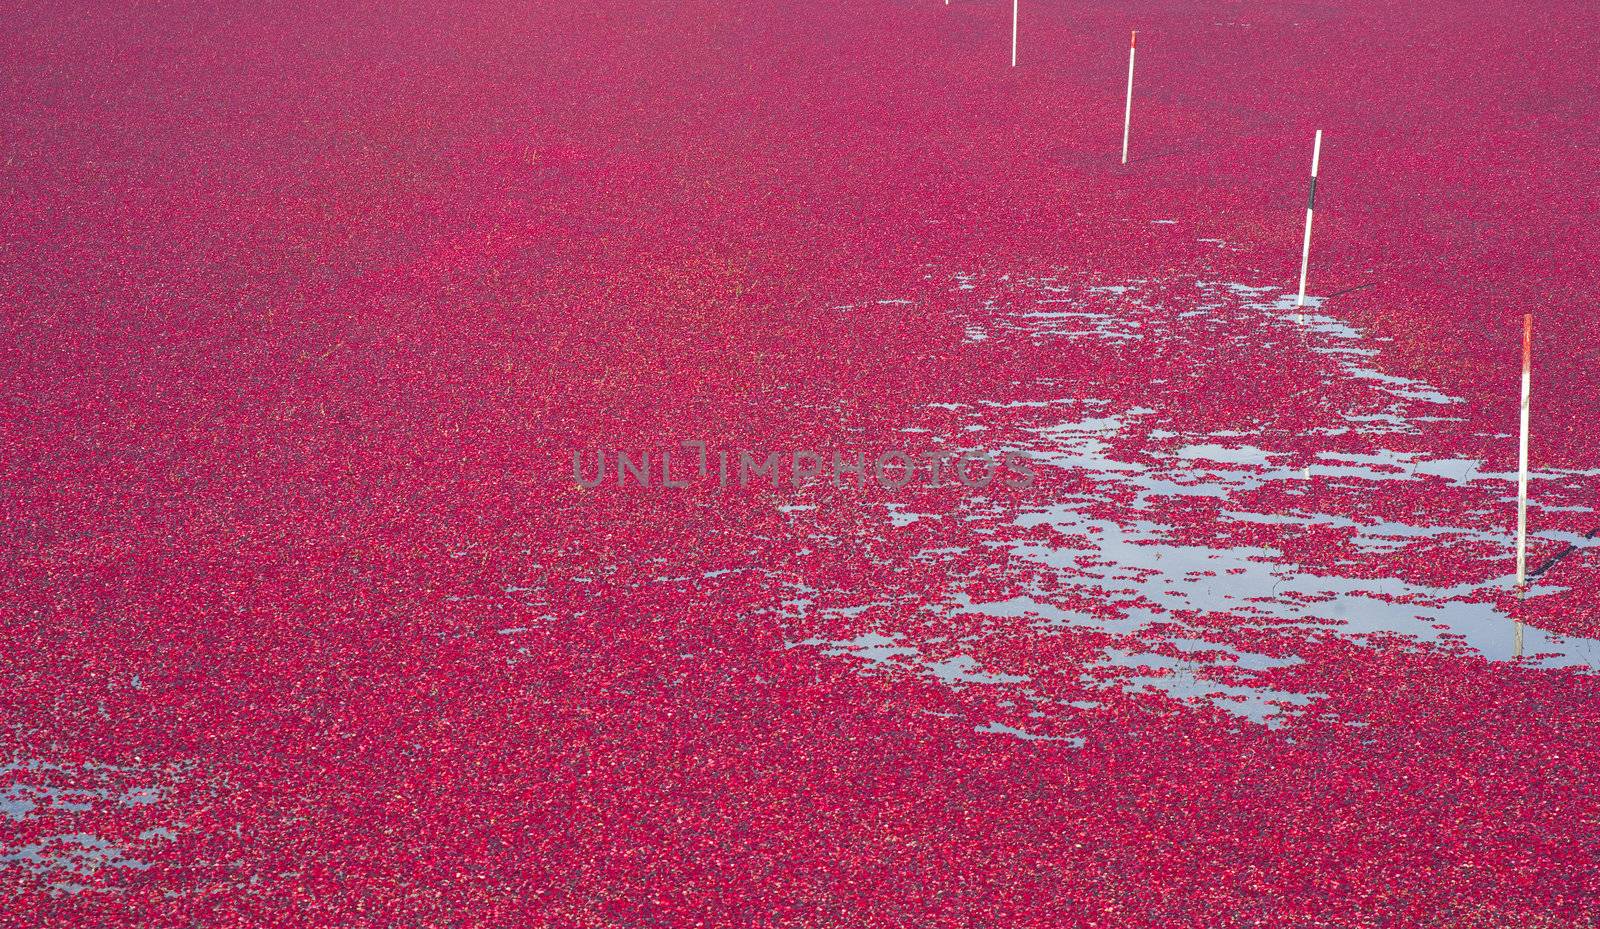 Cranberry Bog by ChrisBoswell